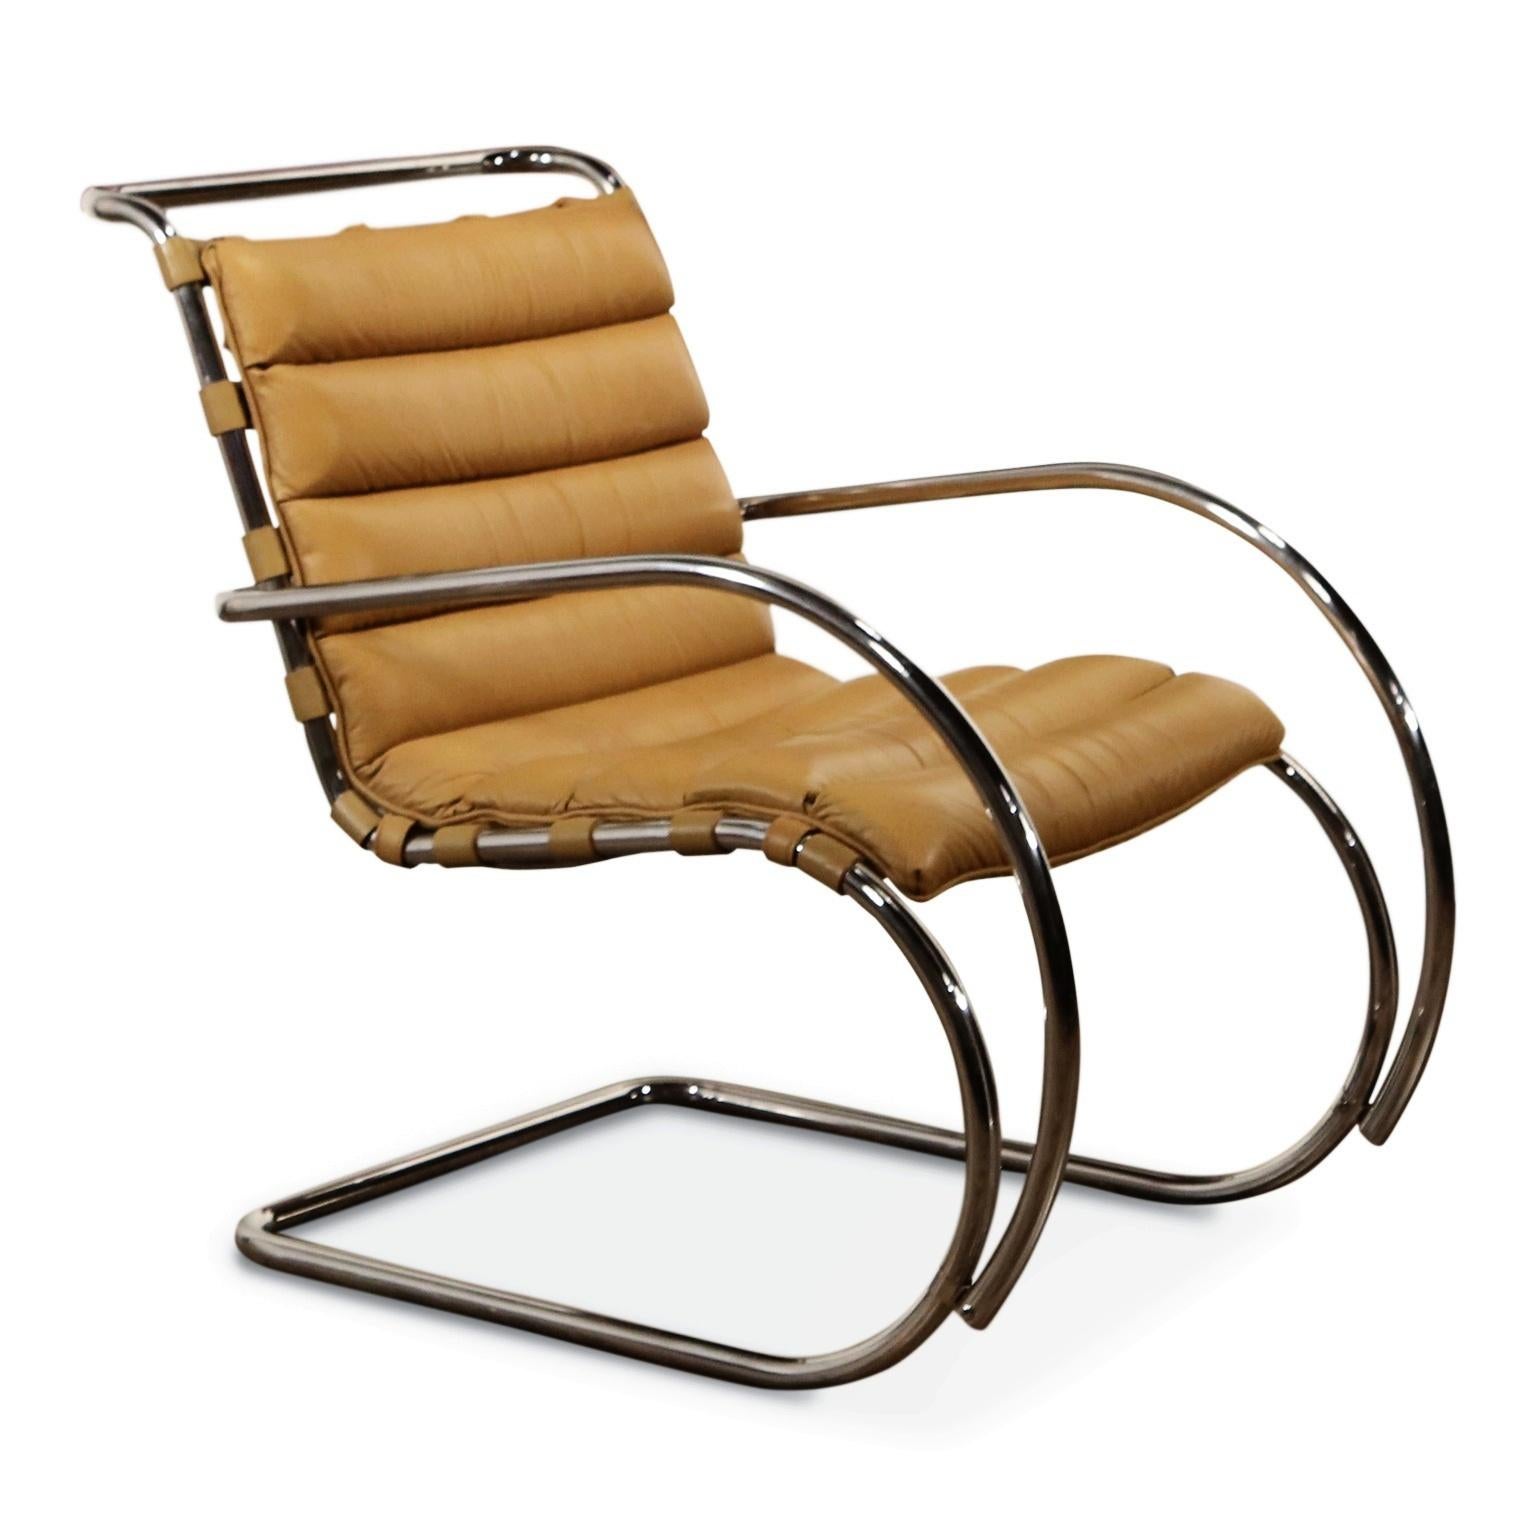 An incredible pair of early production double-signed MR armchairs by Ludwig Mies van der Rohe for Knoll International, date stamped June 1978 productions, both pairs possess their original Knoll International tags to the leather seat cushions and